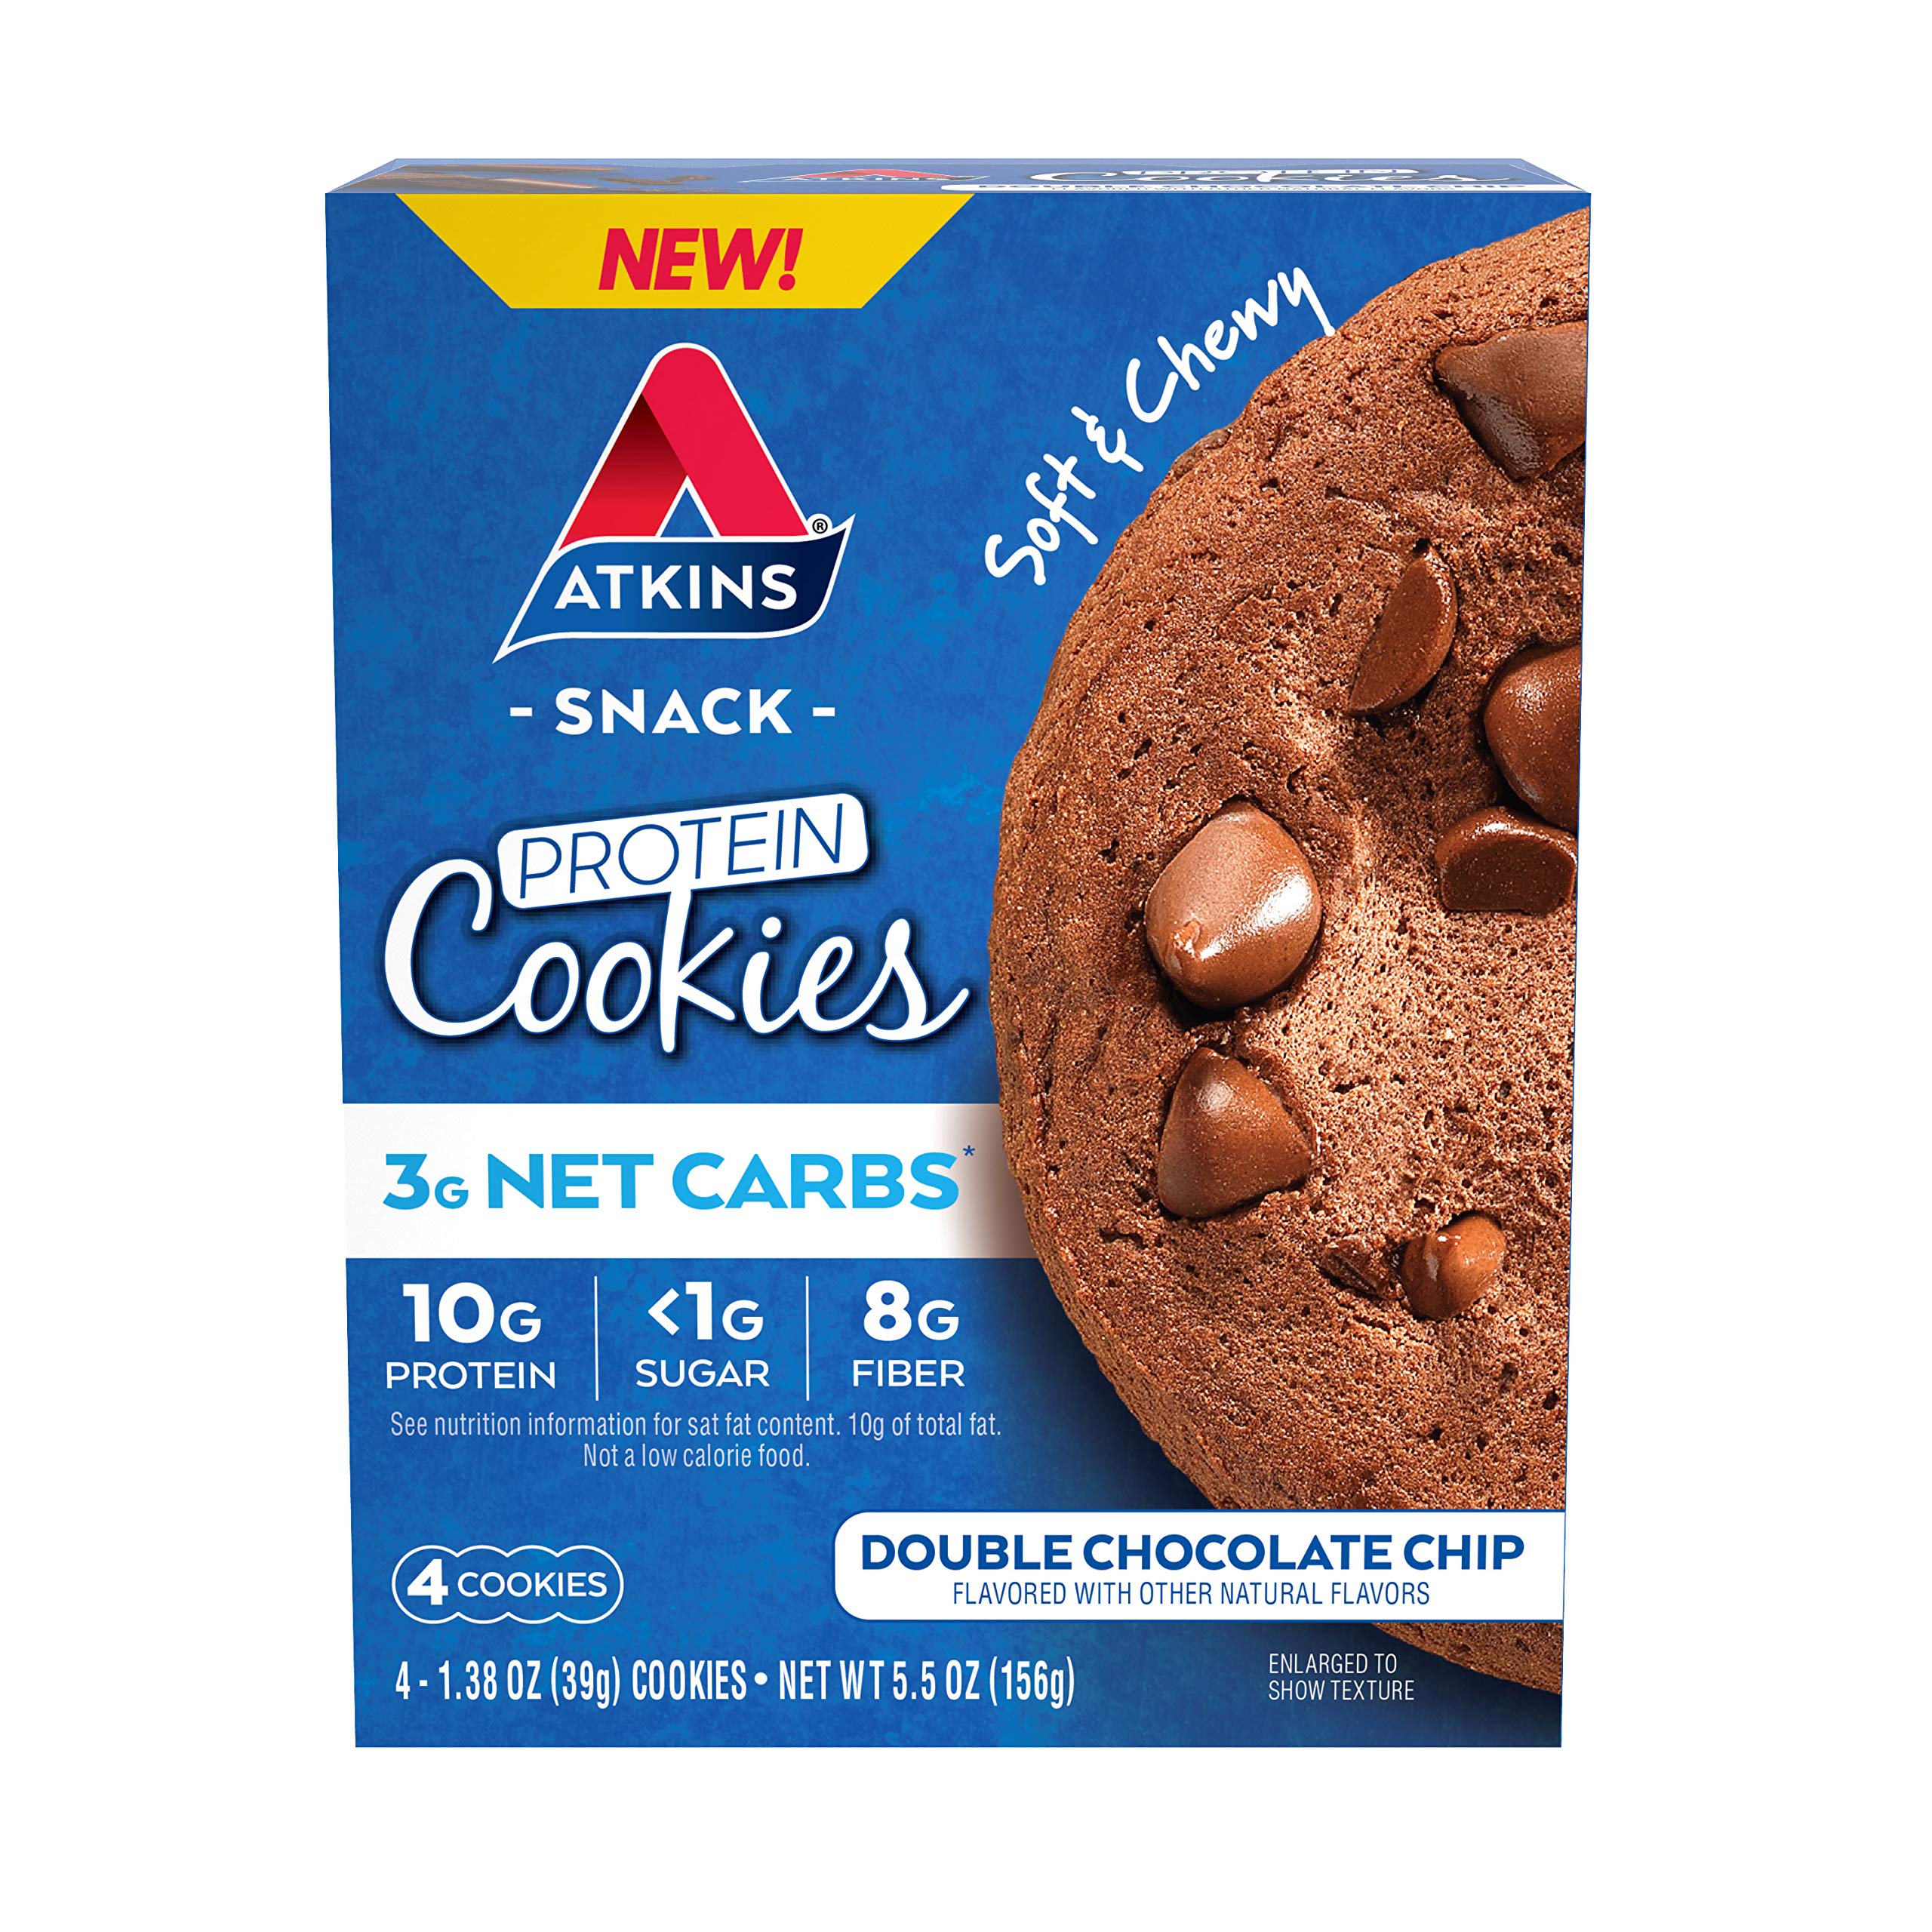 Atkins Protein Chips Variety Pack, 4g Net Carbs, 13g Protein, Gluten Free, Low Glycemic, 12 Count & Double Chocolate Chip Protein Cookie, Protein Dessert, Rich in Fiber, 3g Net Carbs, 1g Sugar